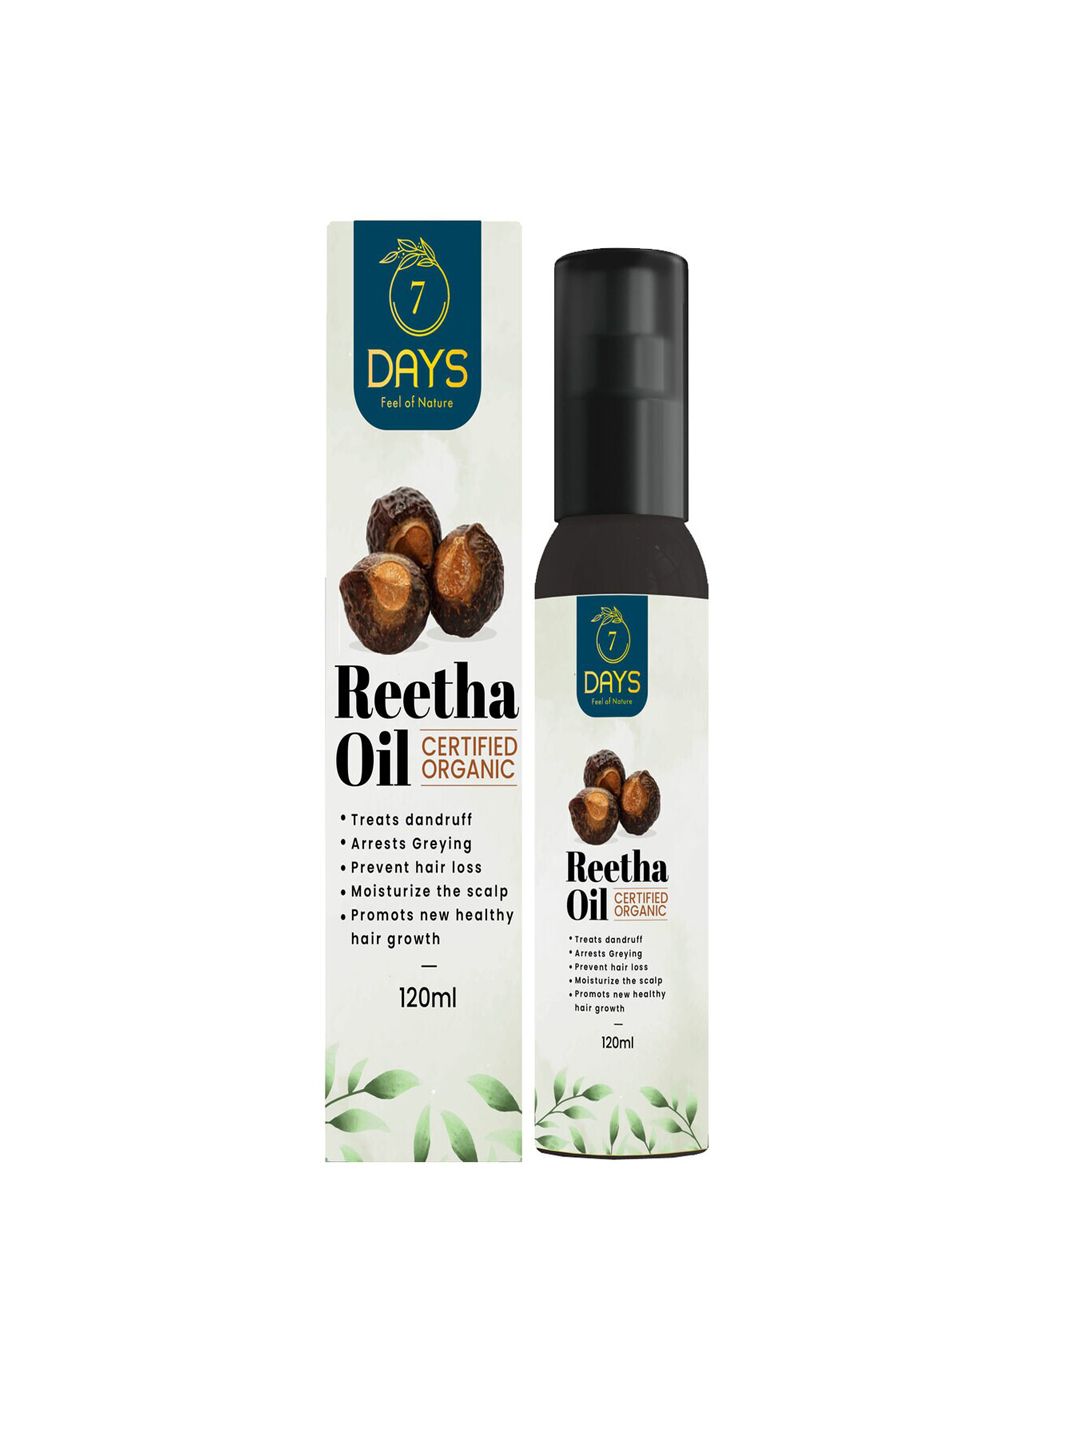 7 DAYS Cold-Pressed 100% Pure Reetha Oil for Hair Fall & Dandruff Control - 120ml Price in India